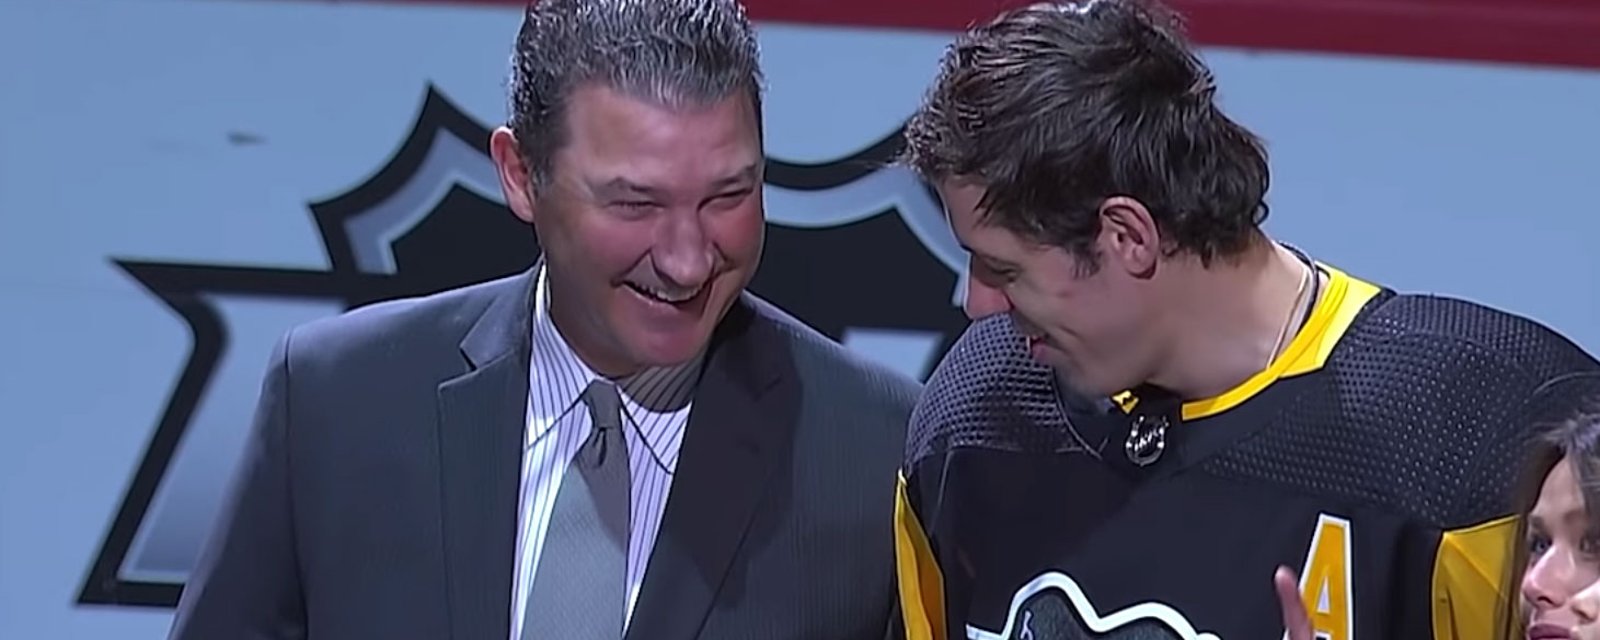 Mario Lemieux does not want to trade Malkin...